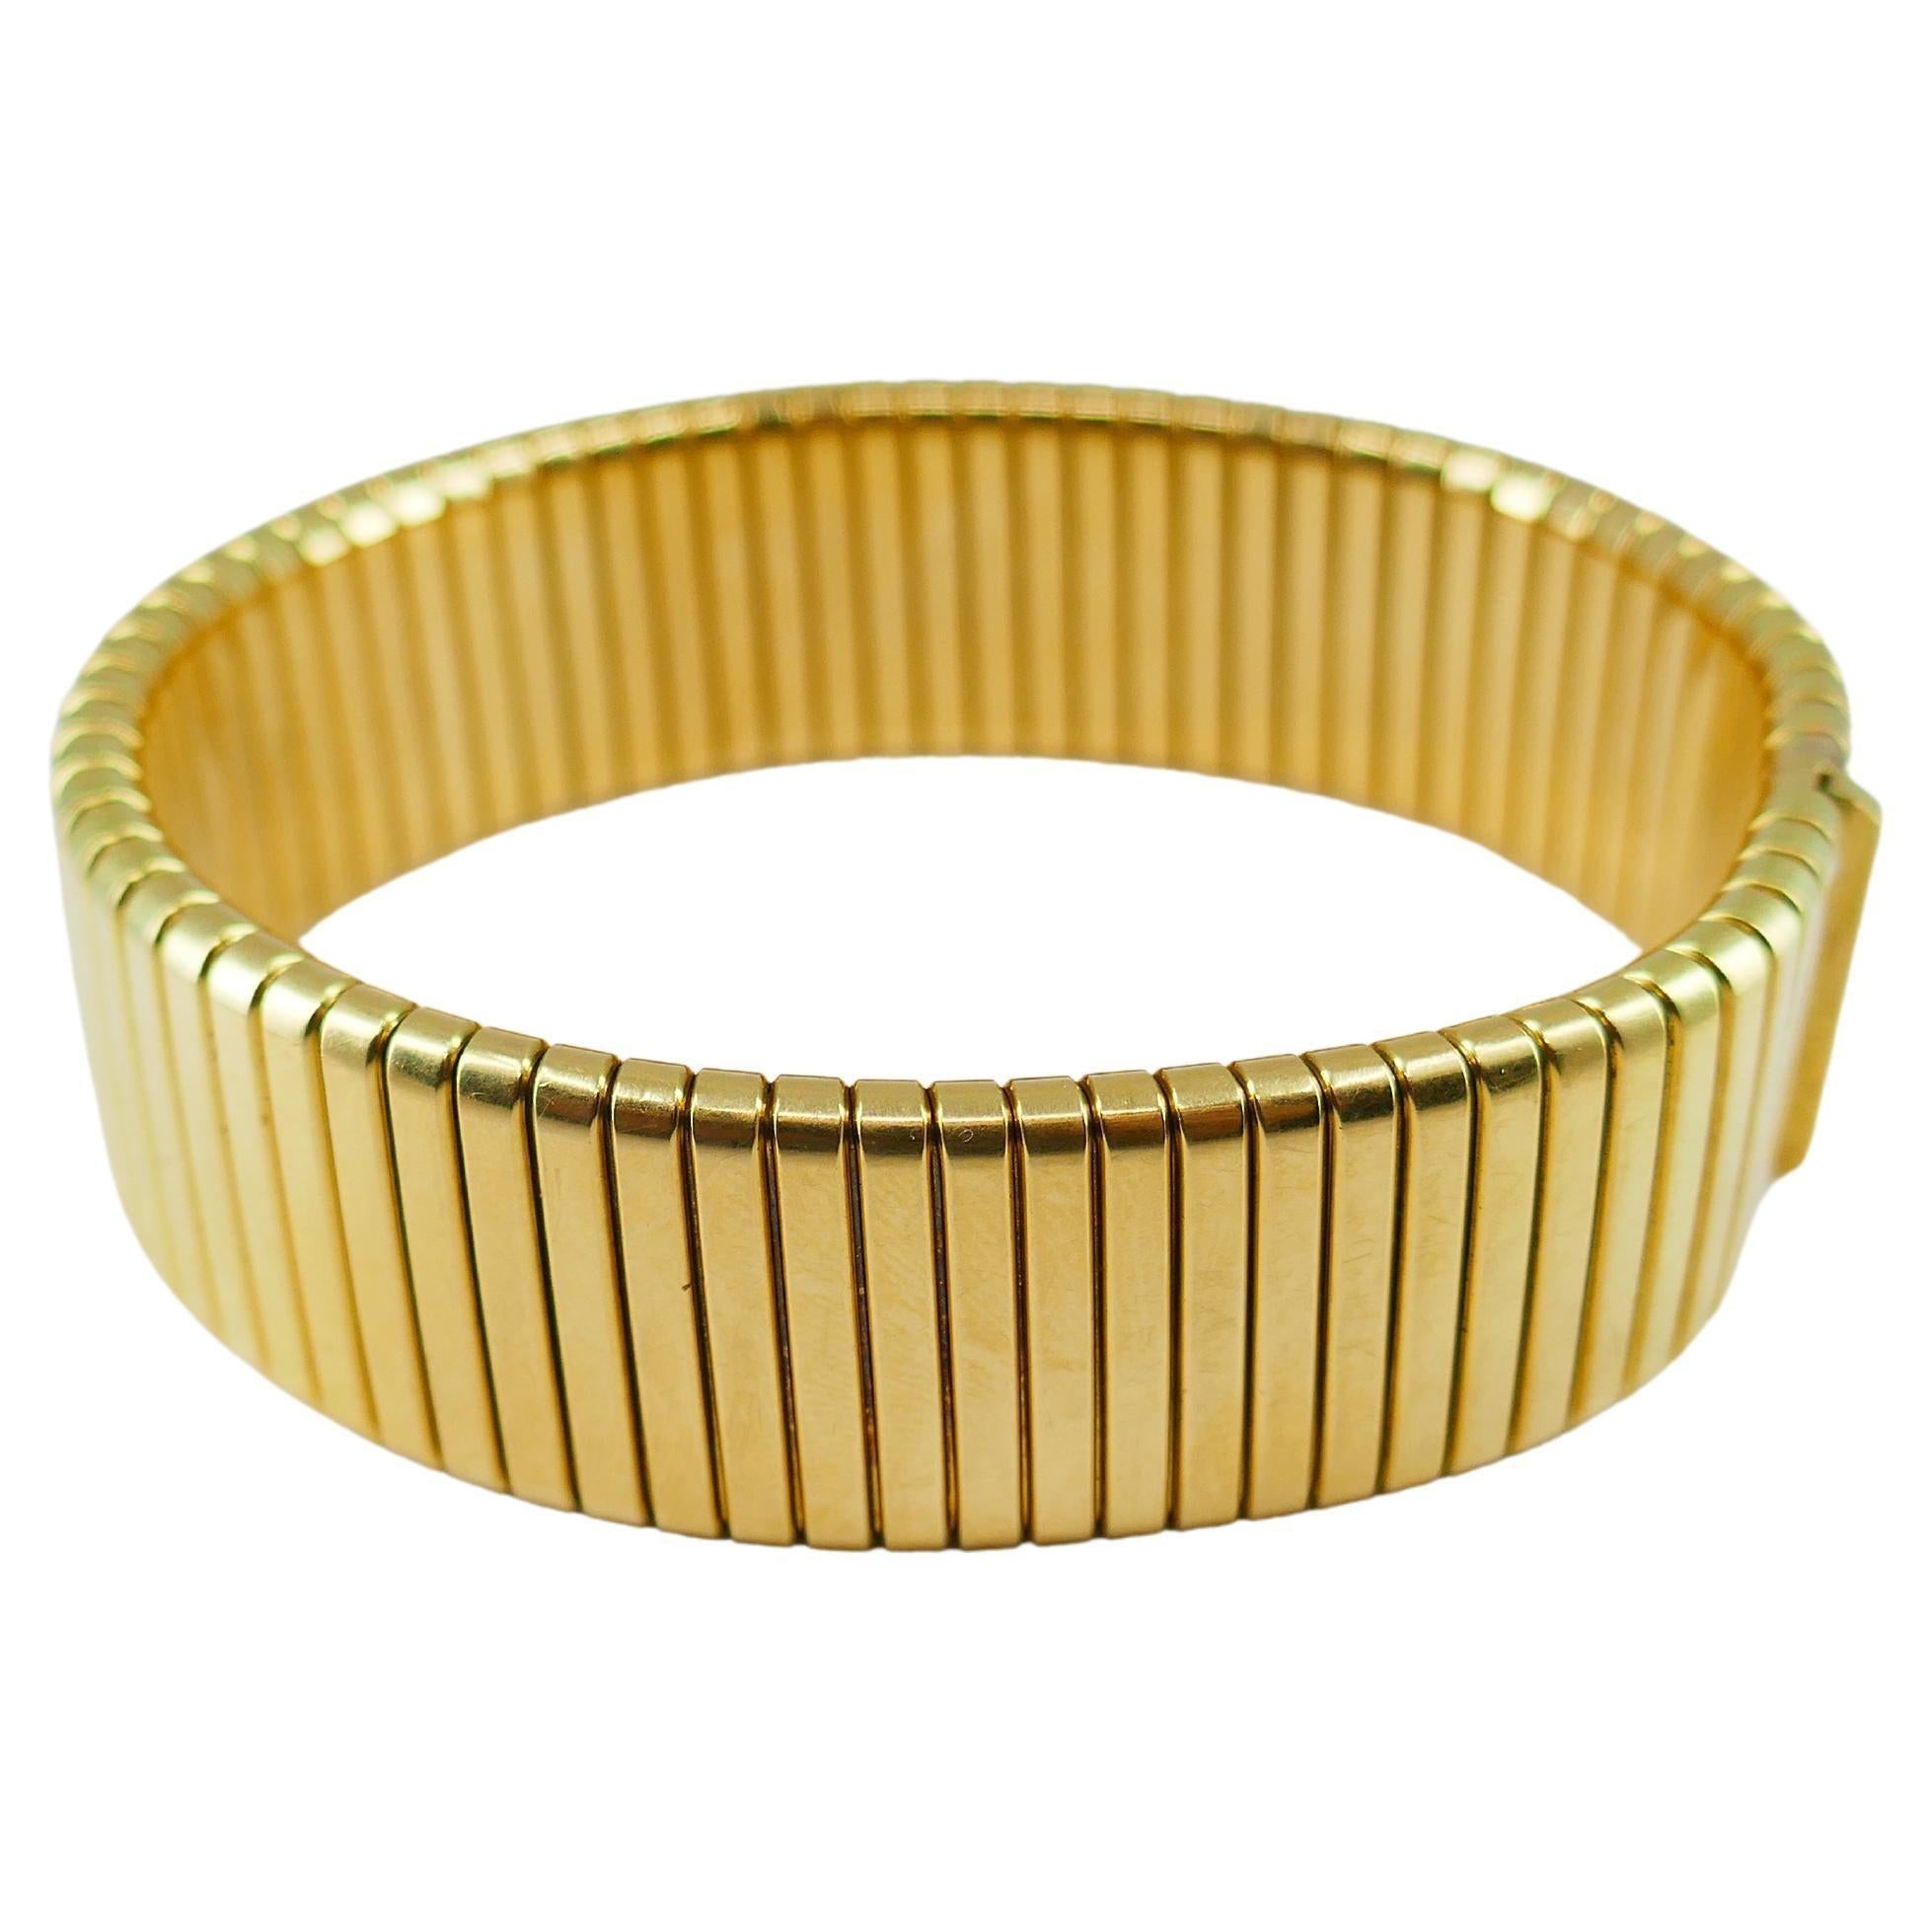 A great vintage Tubogas bracelet made of 18k gold.
The bracelet is elegant and classic. It has rectangular shape with slightly rounded edges. The bracelet’s geometry it perfect; the vertical lines’ width works well with the overall bracelet's width.